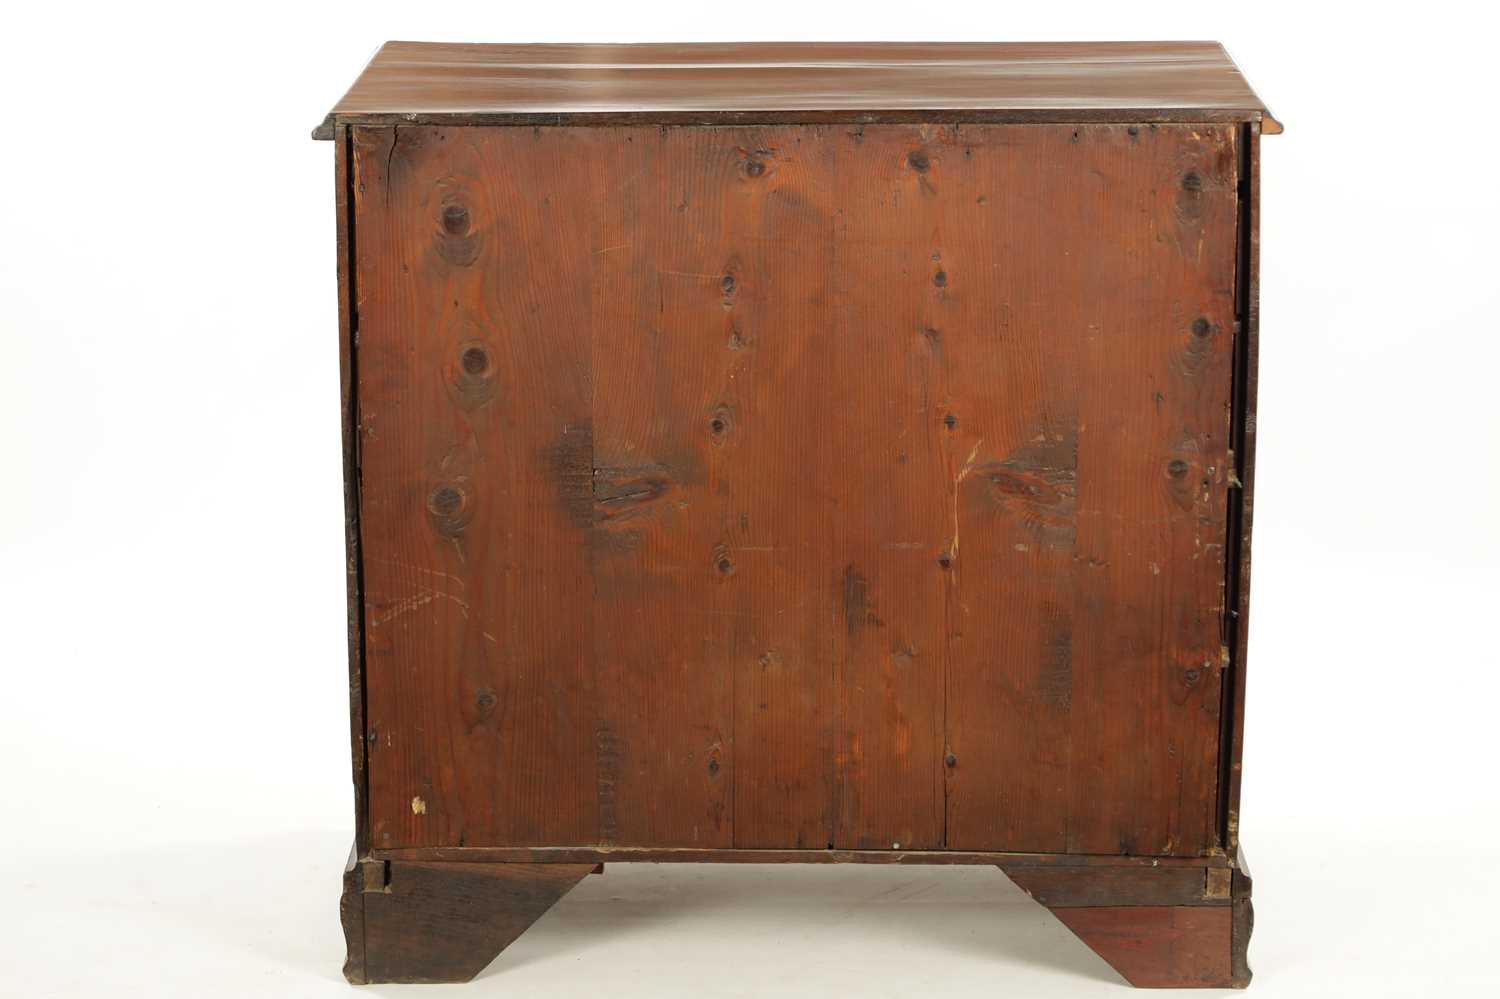 A GEORGE III MAHOGANY LANCASHIRE CHEST OF DRAWERS - Image 9 of 9